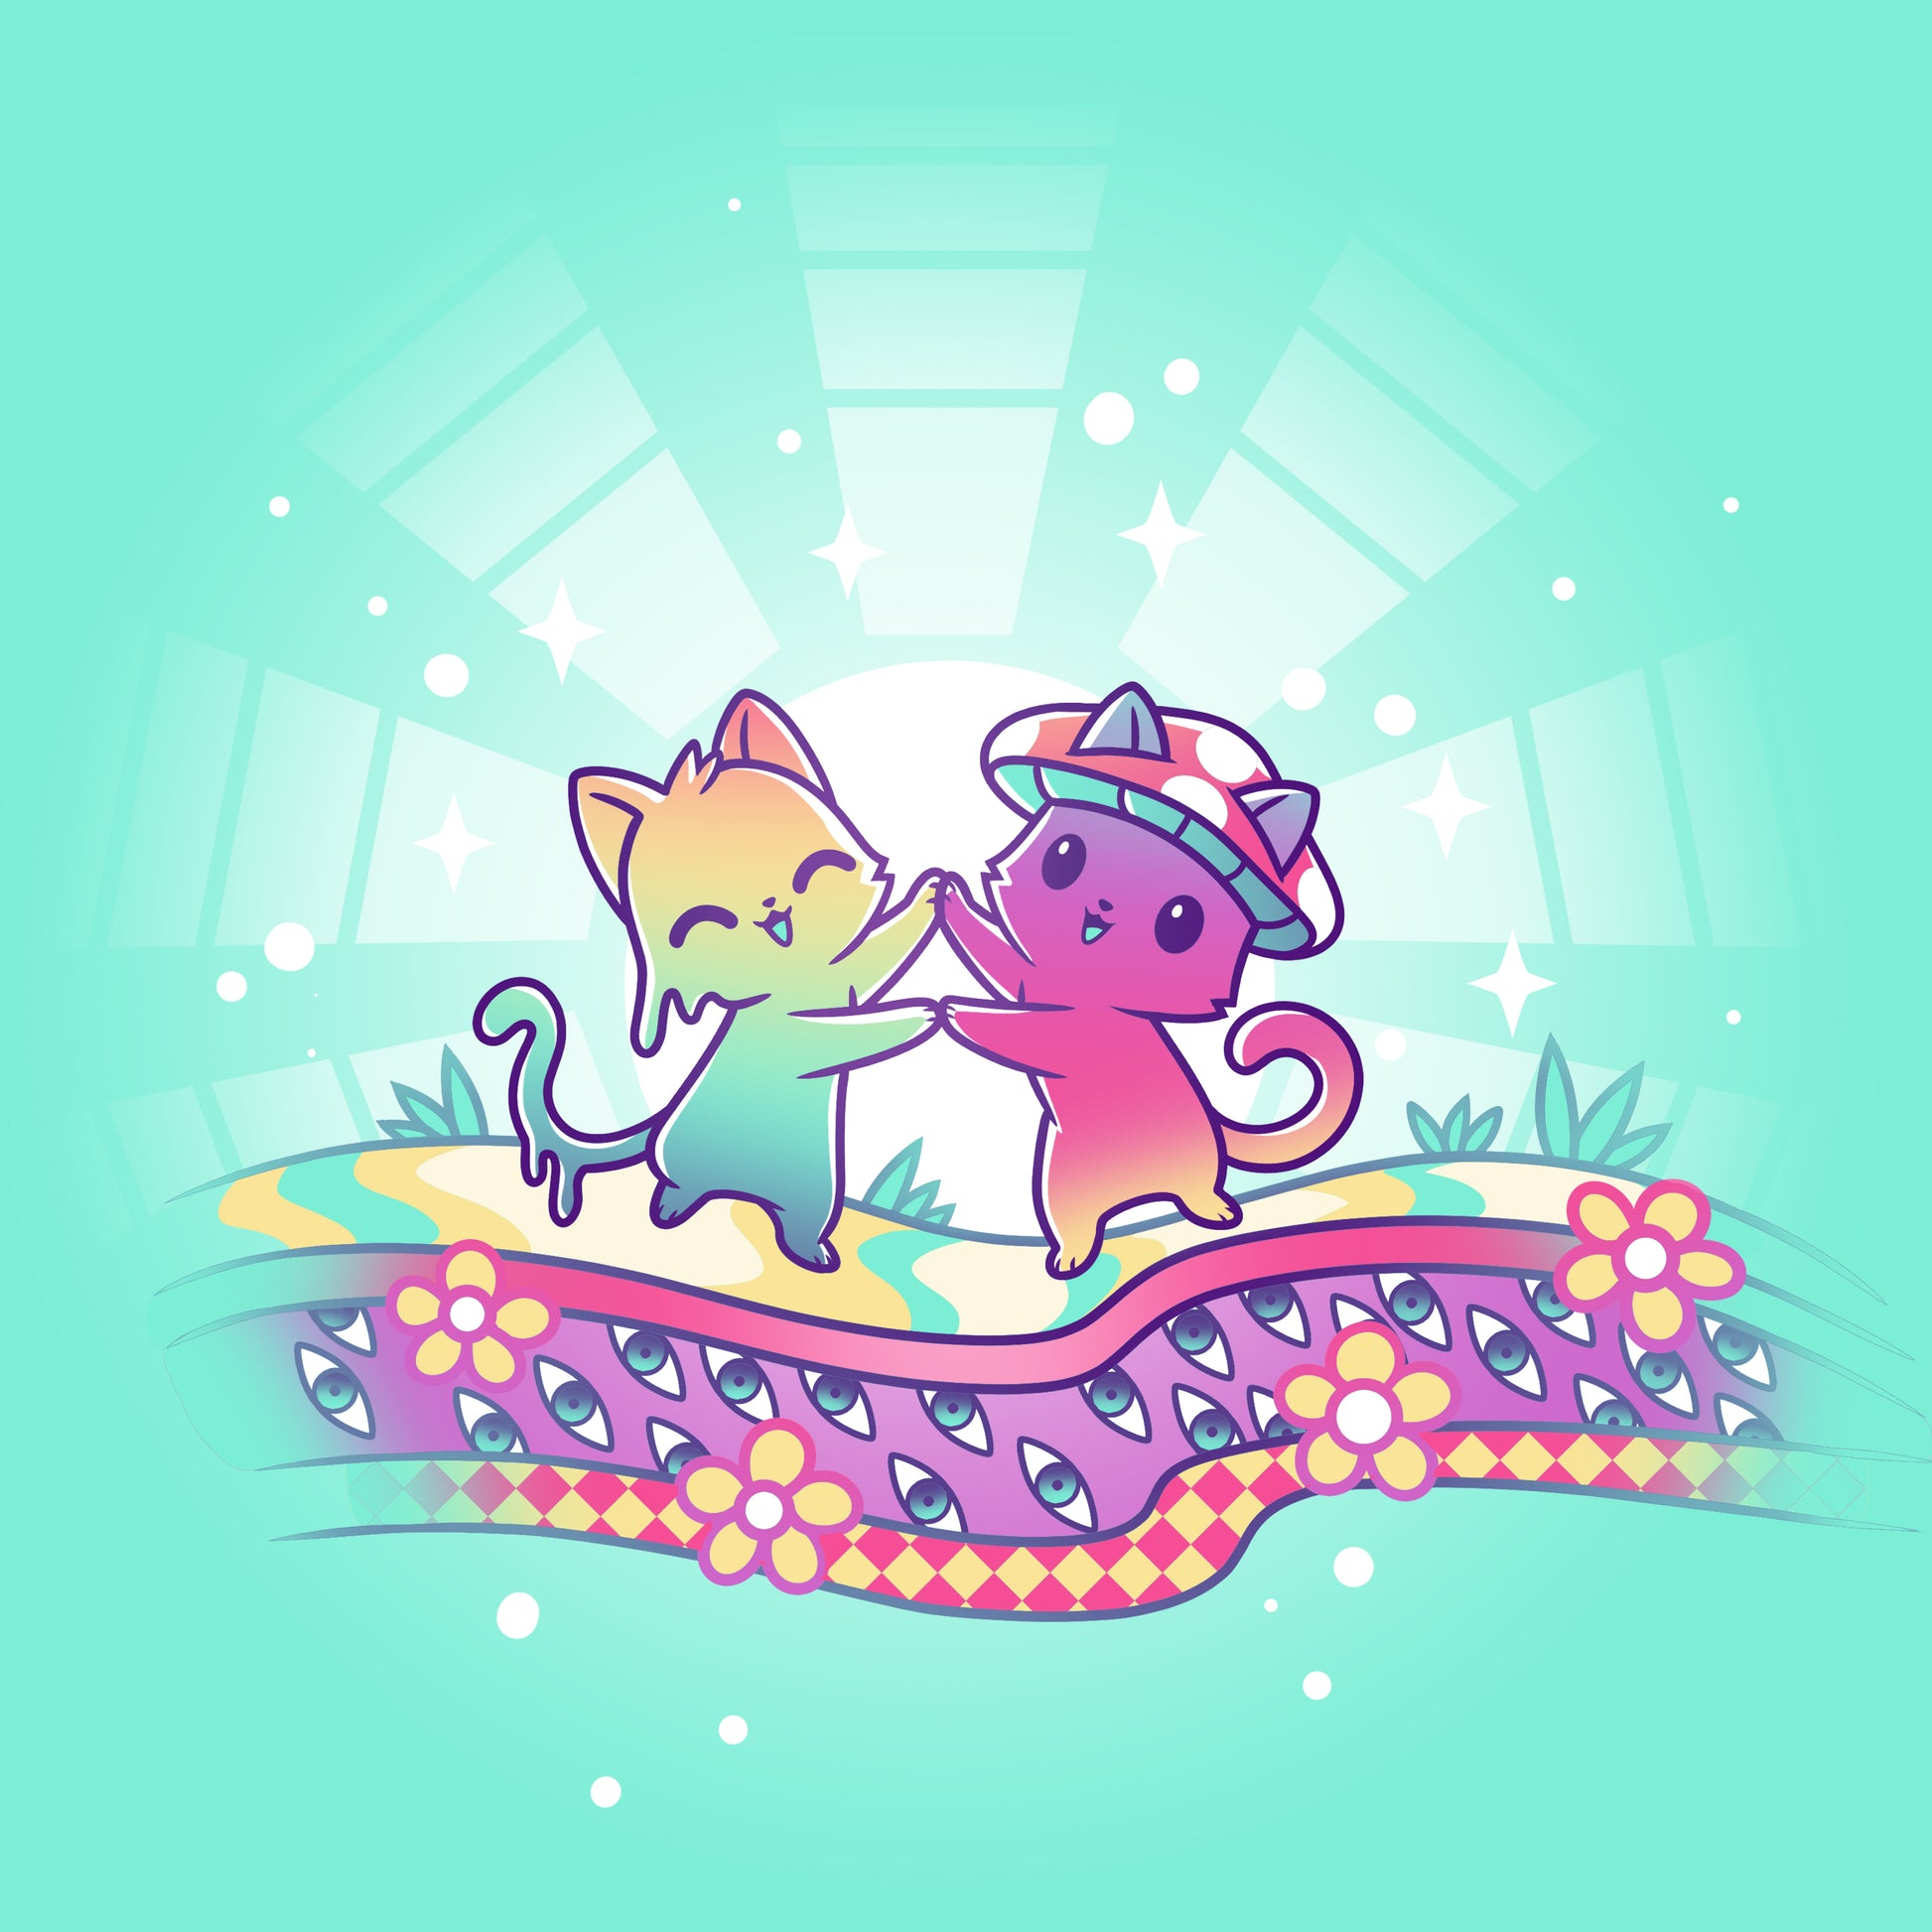 Two TeeTurtle Dancing Cats are dancing on a colorful background.